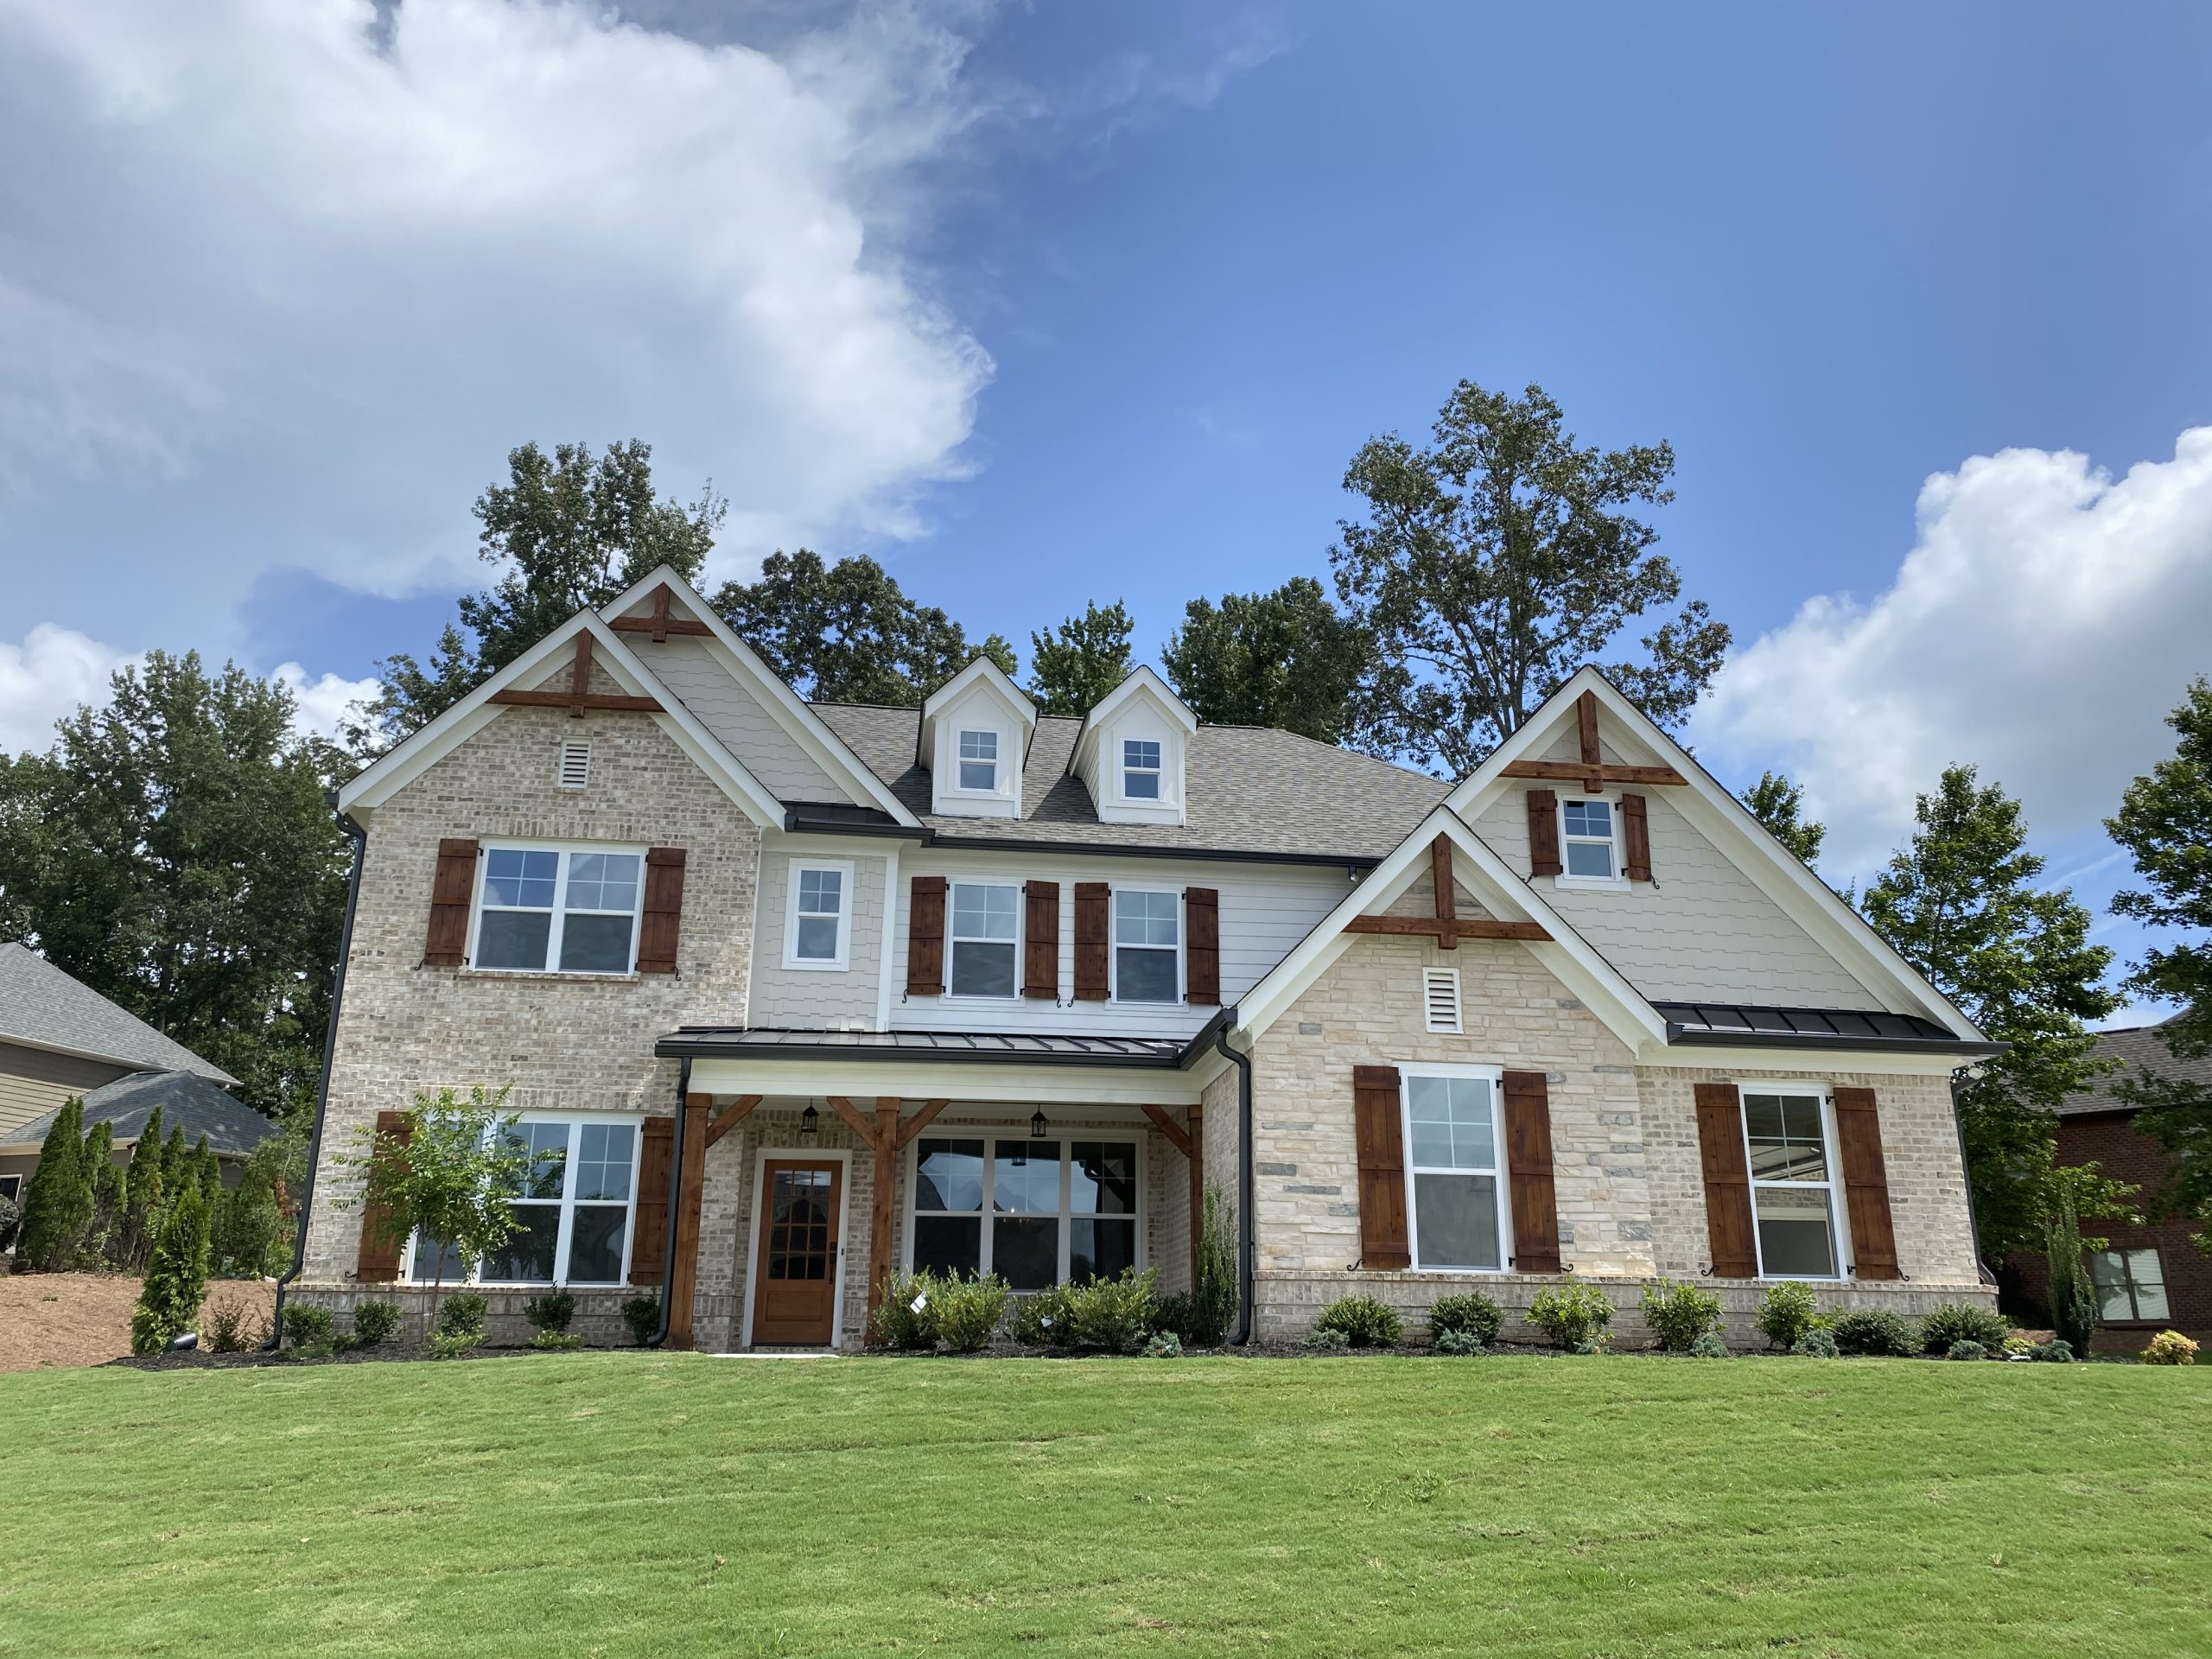 Single-family home in Braselton - one of our many home designs in Traditions of Braselton